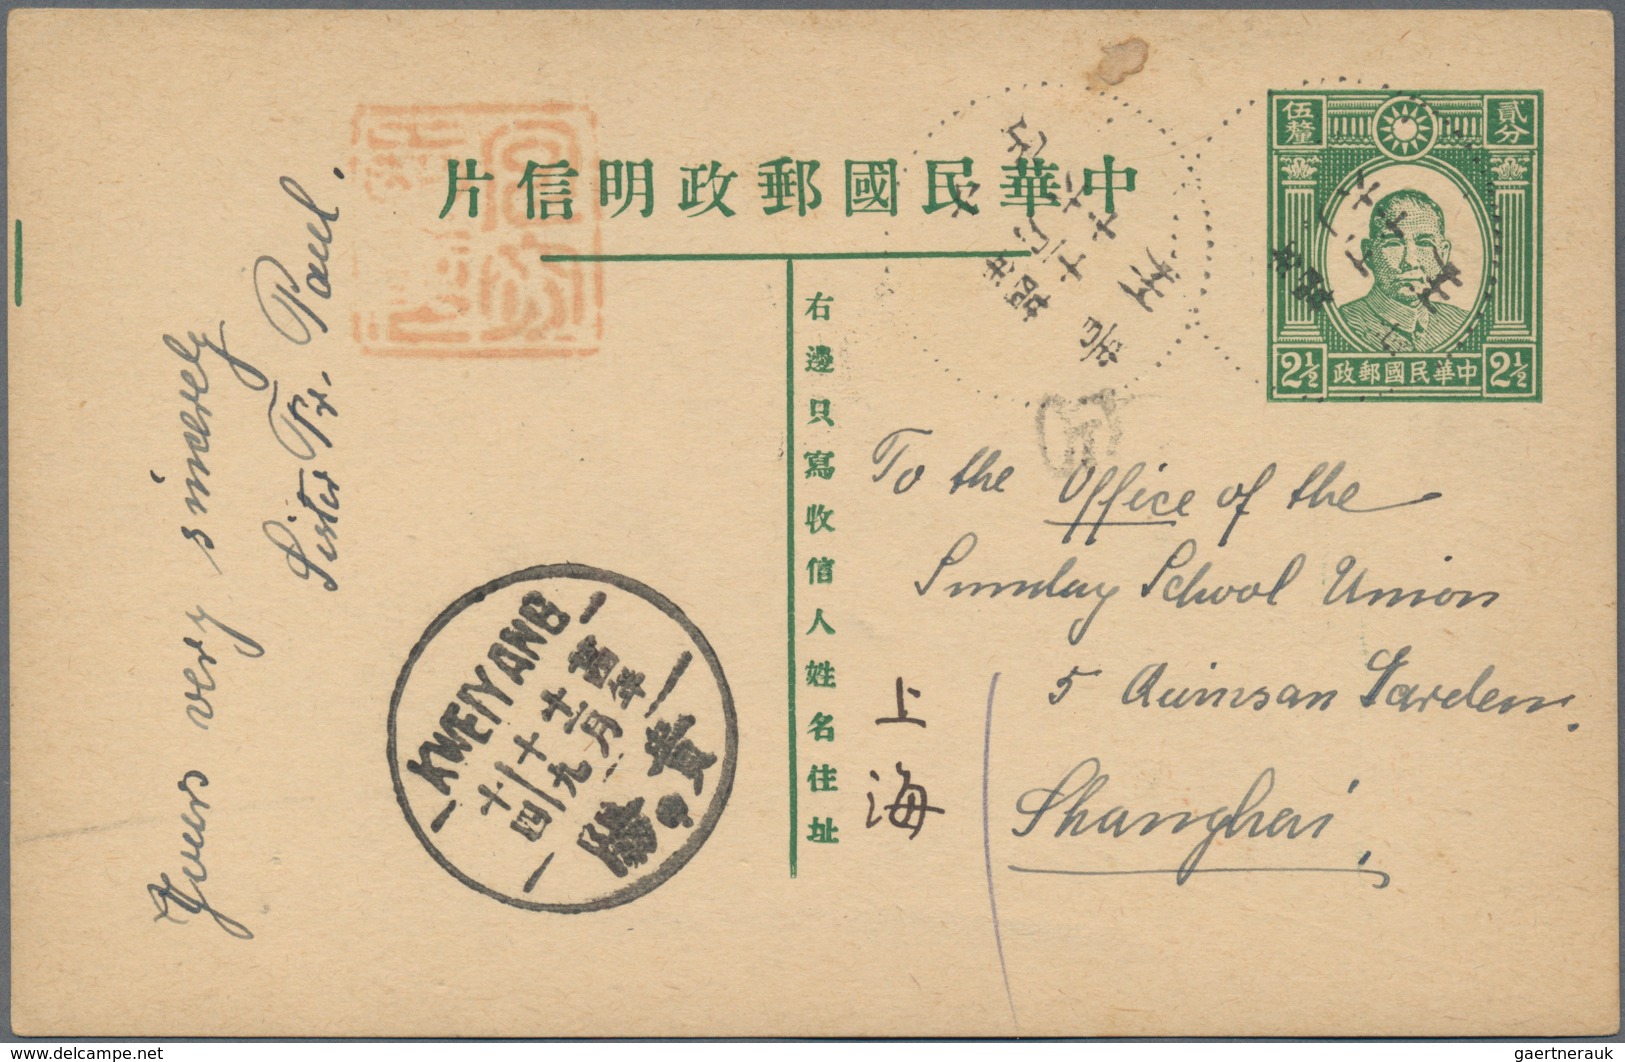 China - Ganzsachen: 1926/35, Cards 2 C. All Used To Union Mission School Shanghai: Junk (5), Old Nam - Cartes Postales